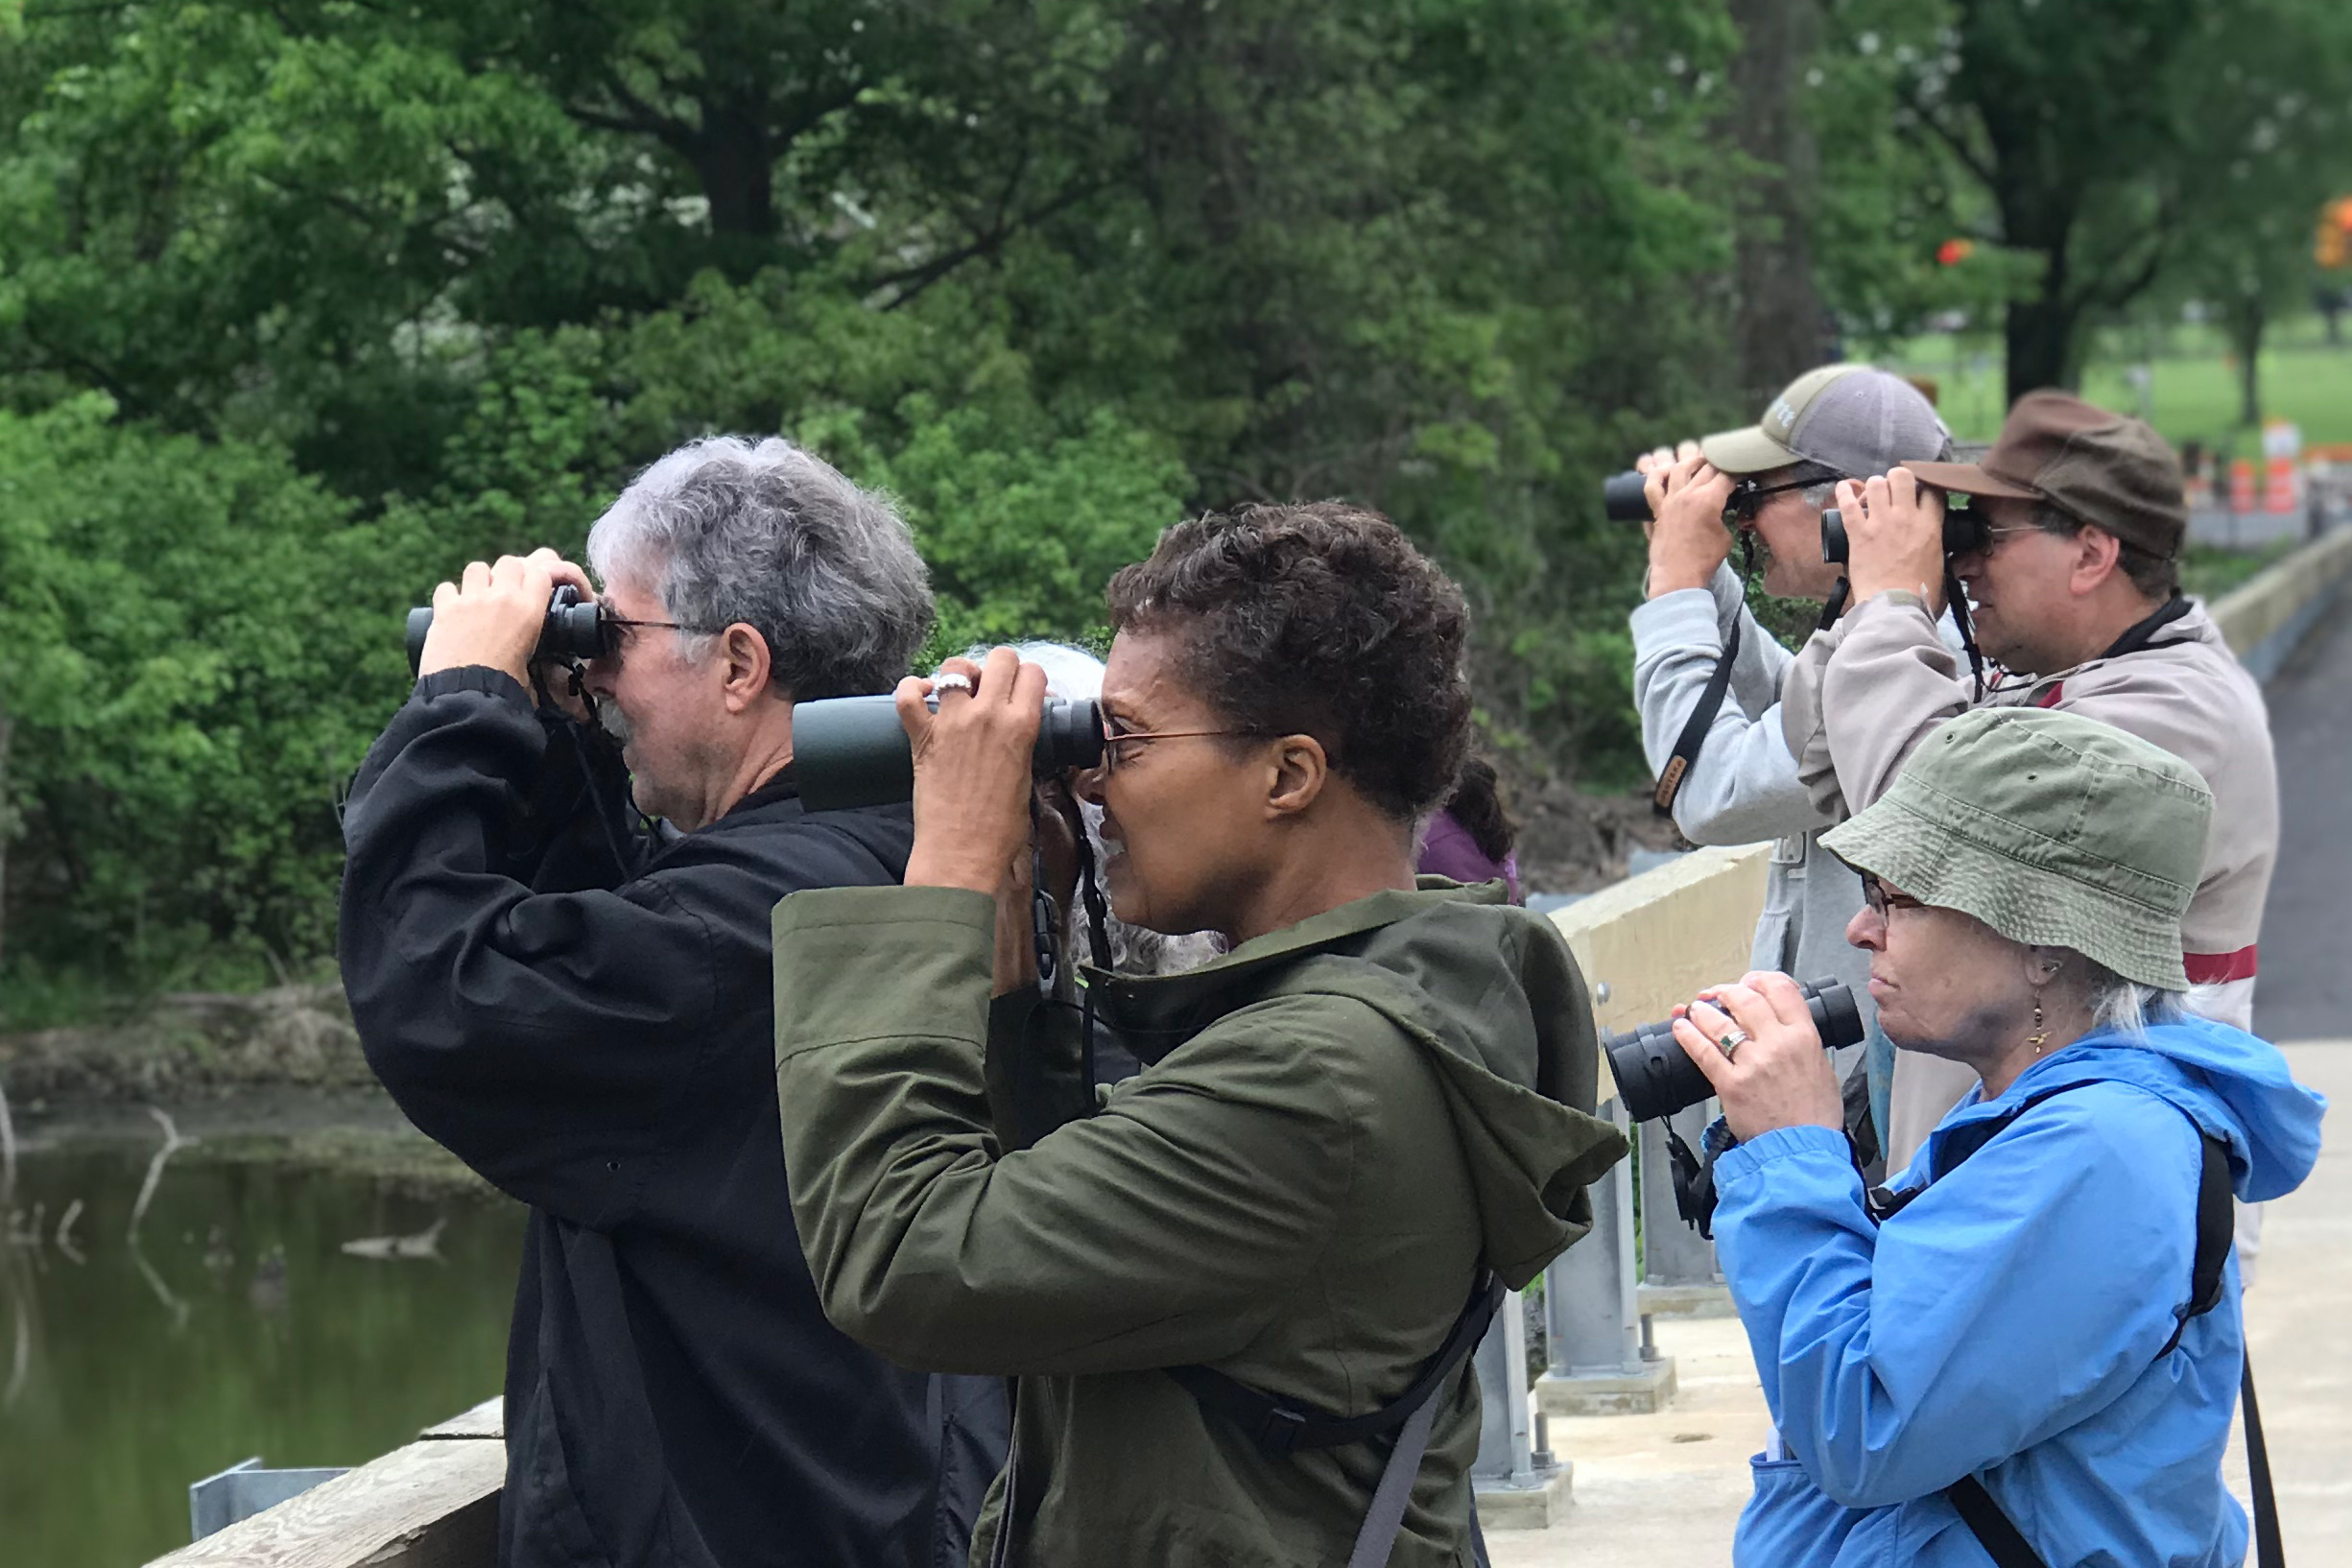 Five adults pictured from the waist up in dark rain jackets facing the left on a foot bridge, holding binoculars overlooking the water.